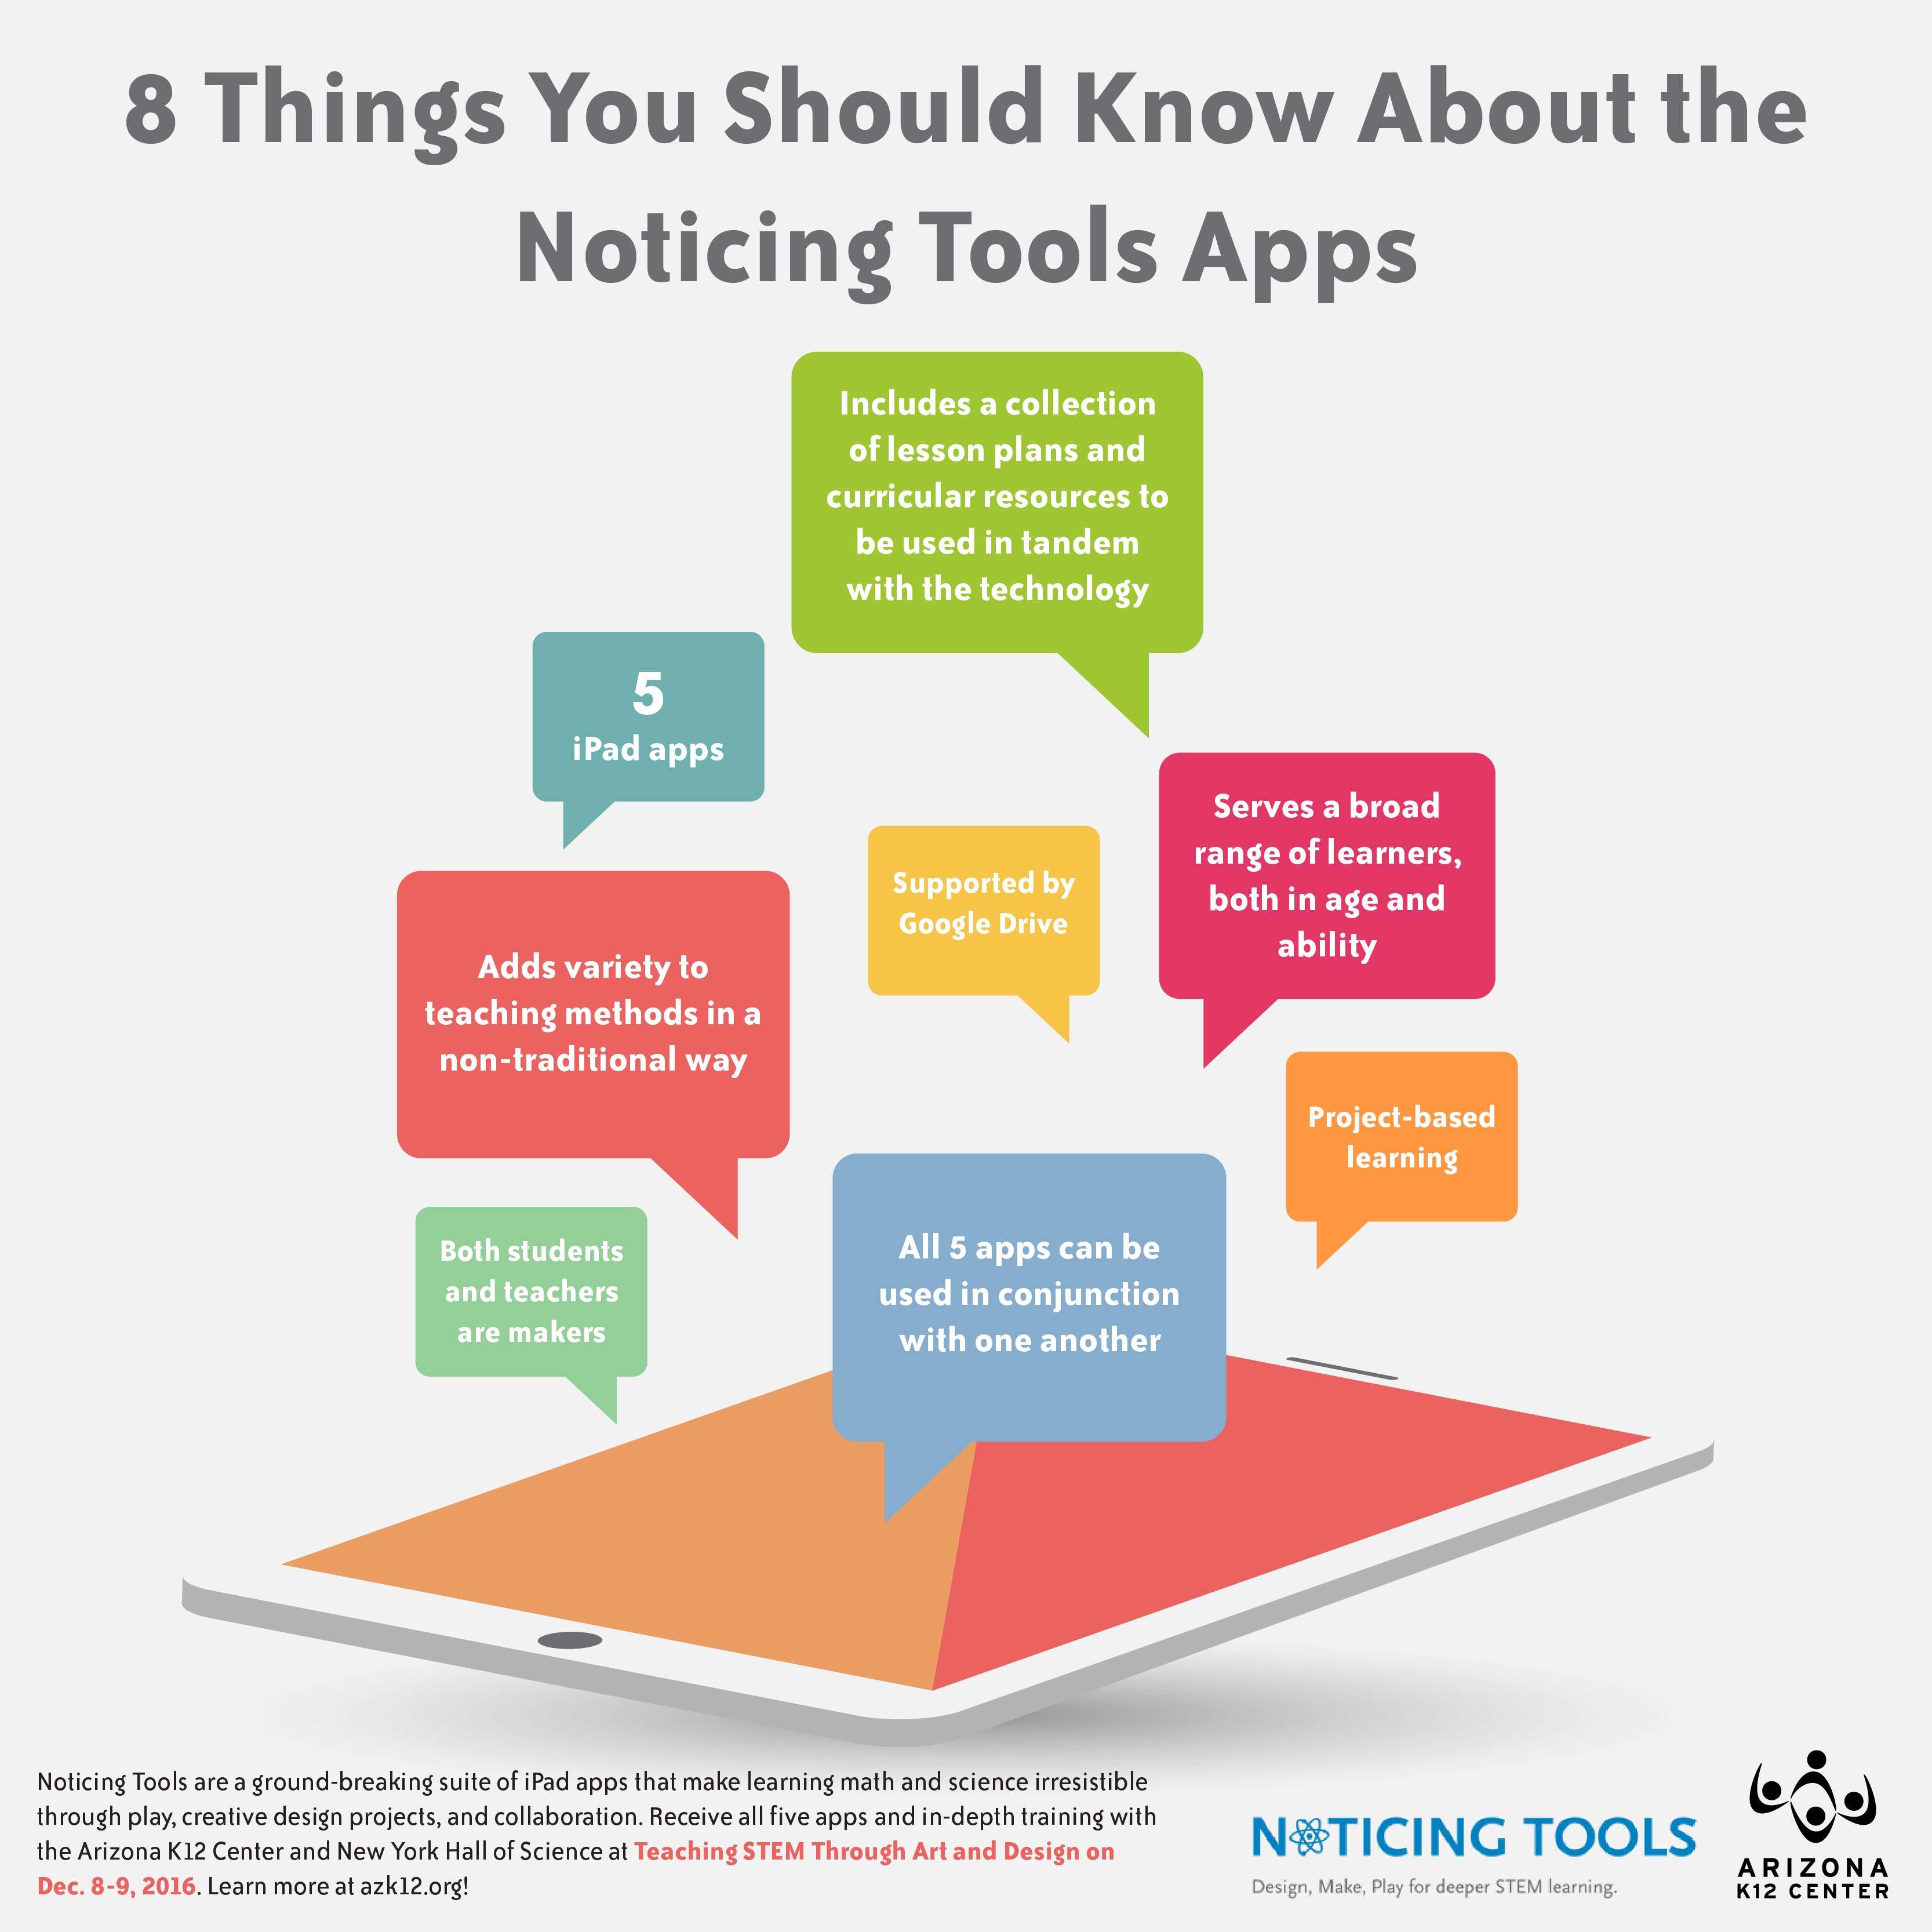 8 Things You Should Know About the Noticing Tools Apps